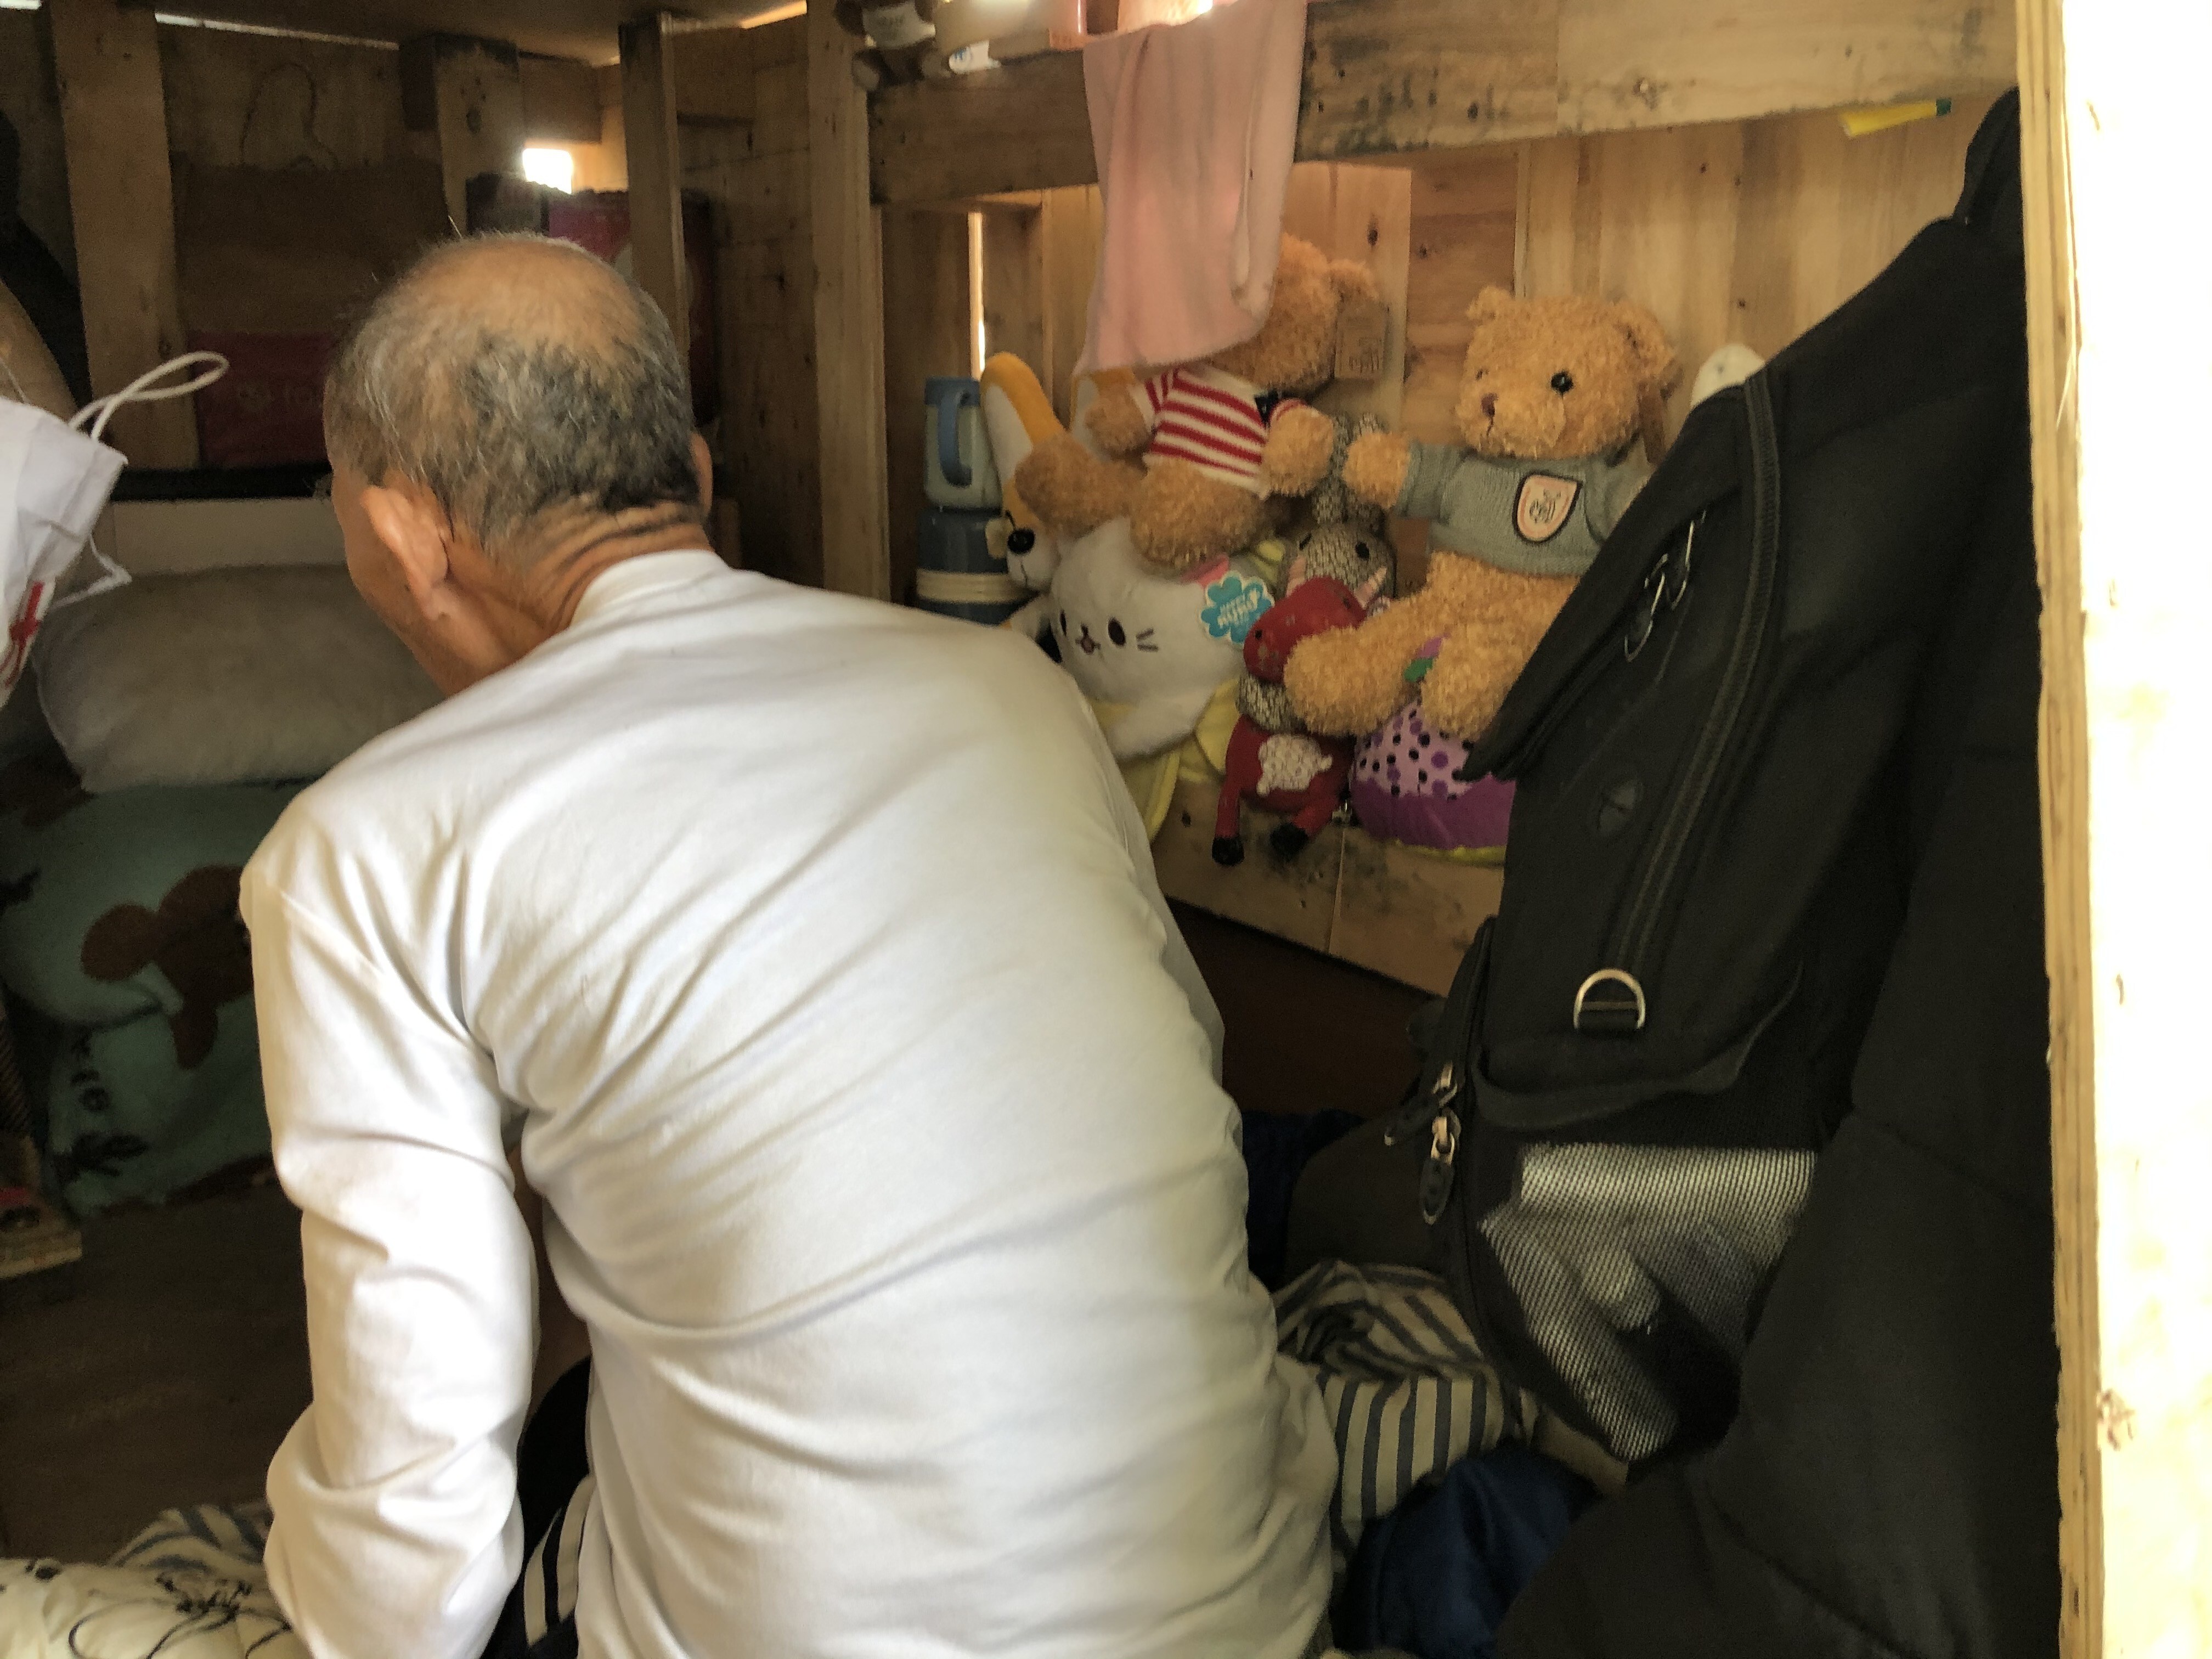 Lau who lives next to his friend of 40 years, Lee, has put stuffed toys in his home to make it more comfortable. Photo: Laura Westbrook